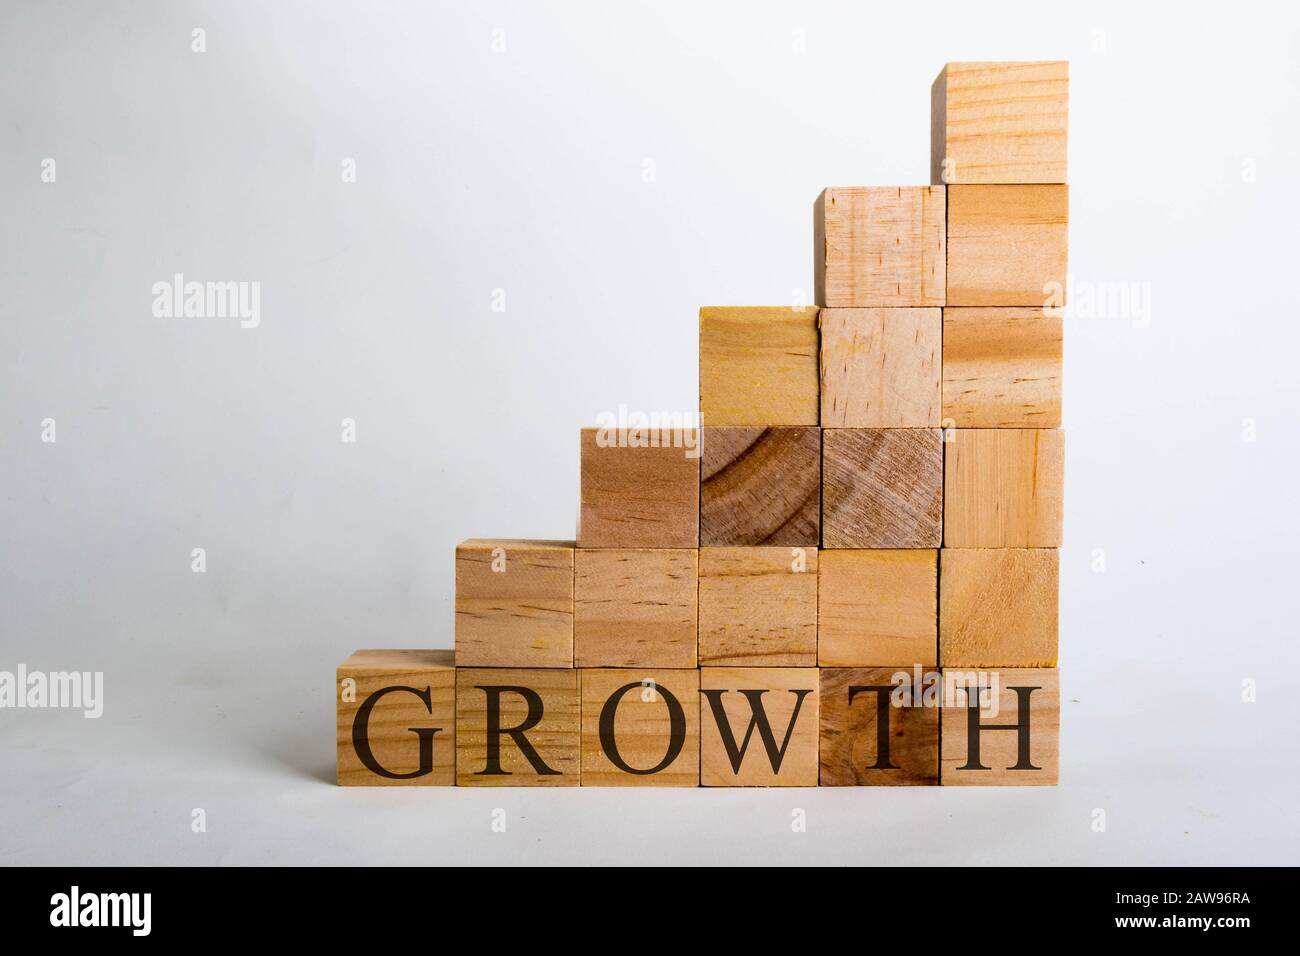 Wooden cubes with lettering spelling Growth shaped like a graph. Business or political concept Stock Photo